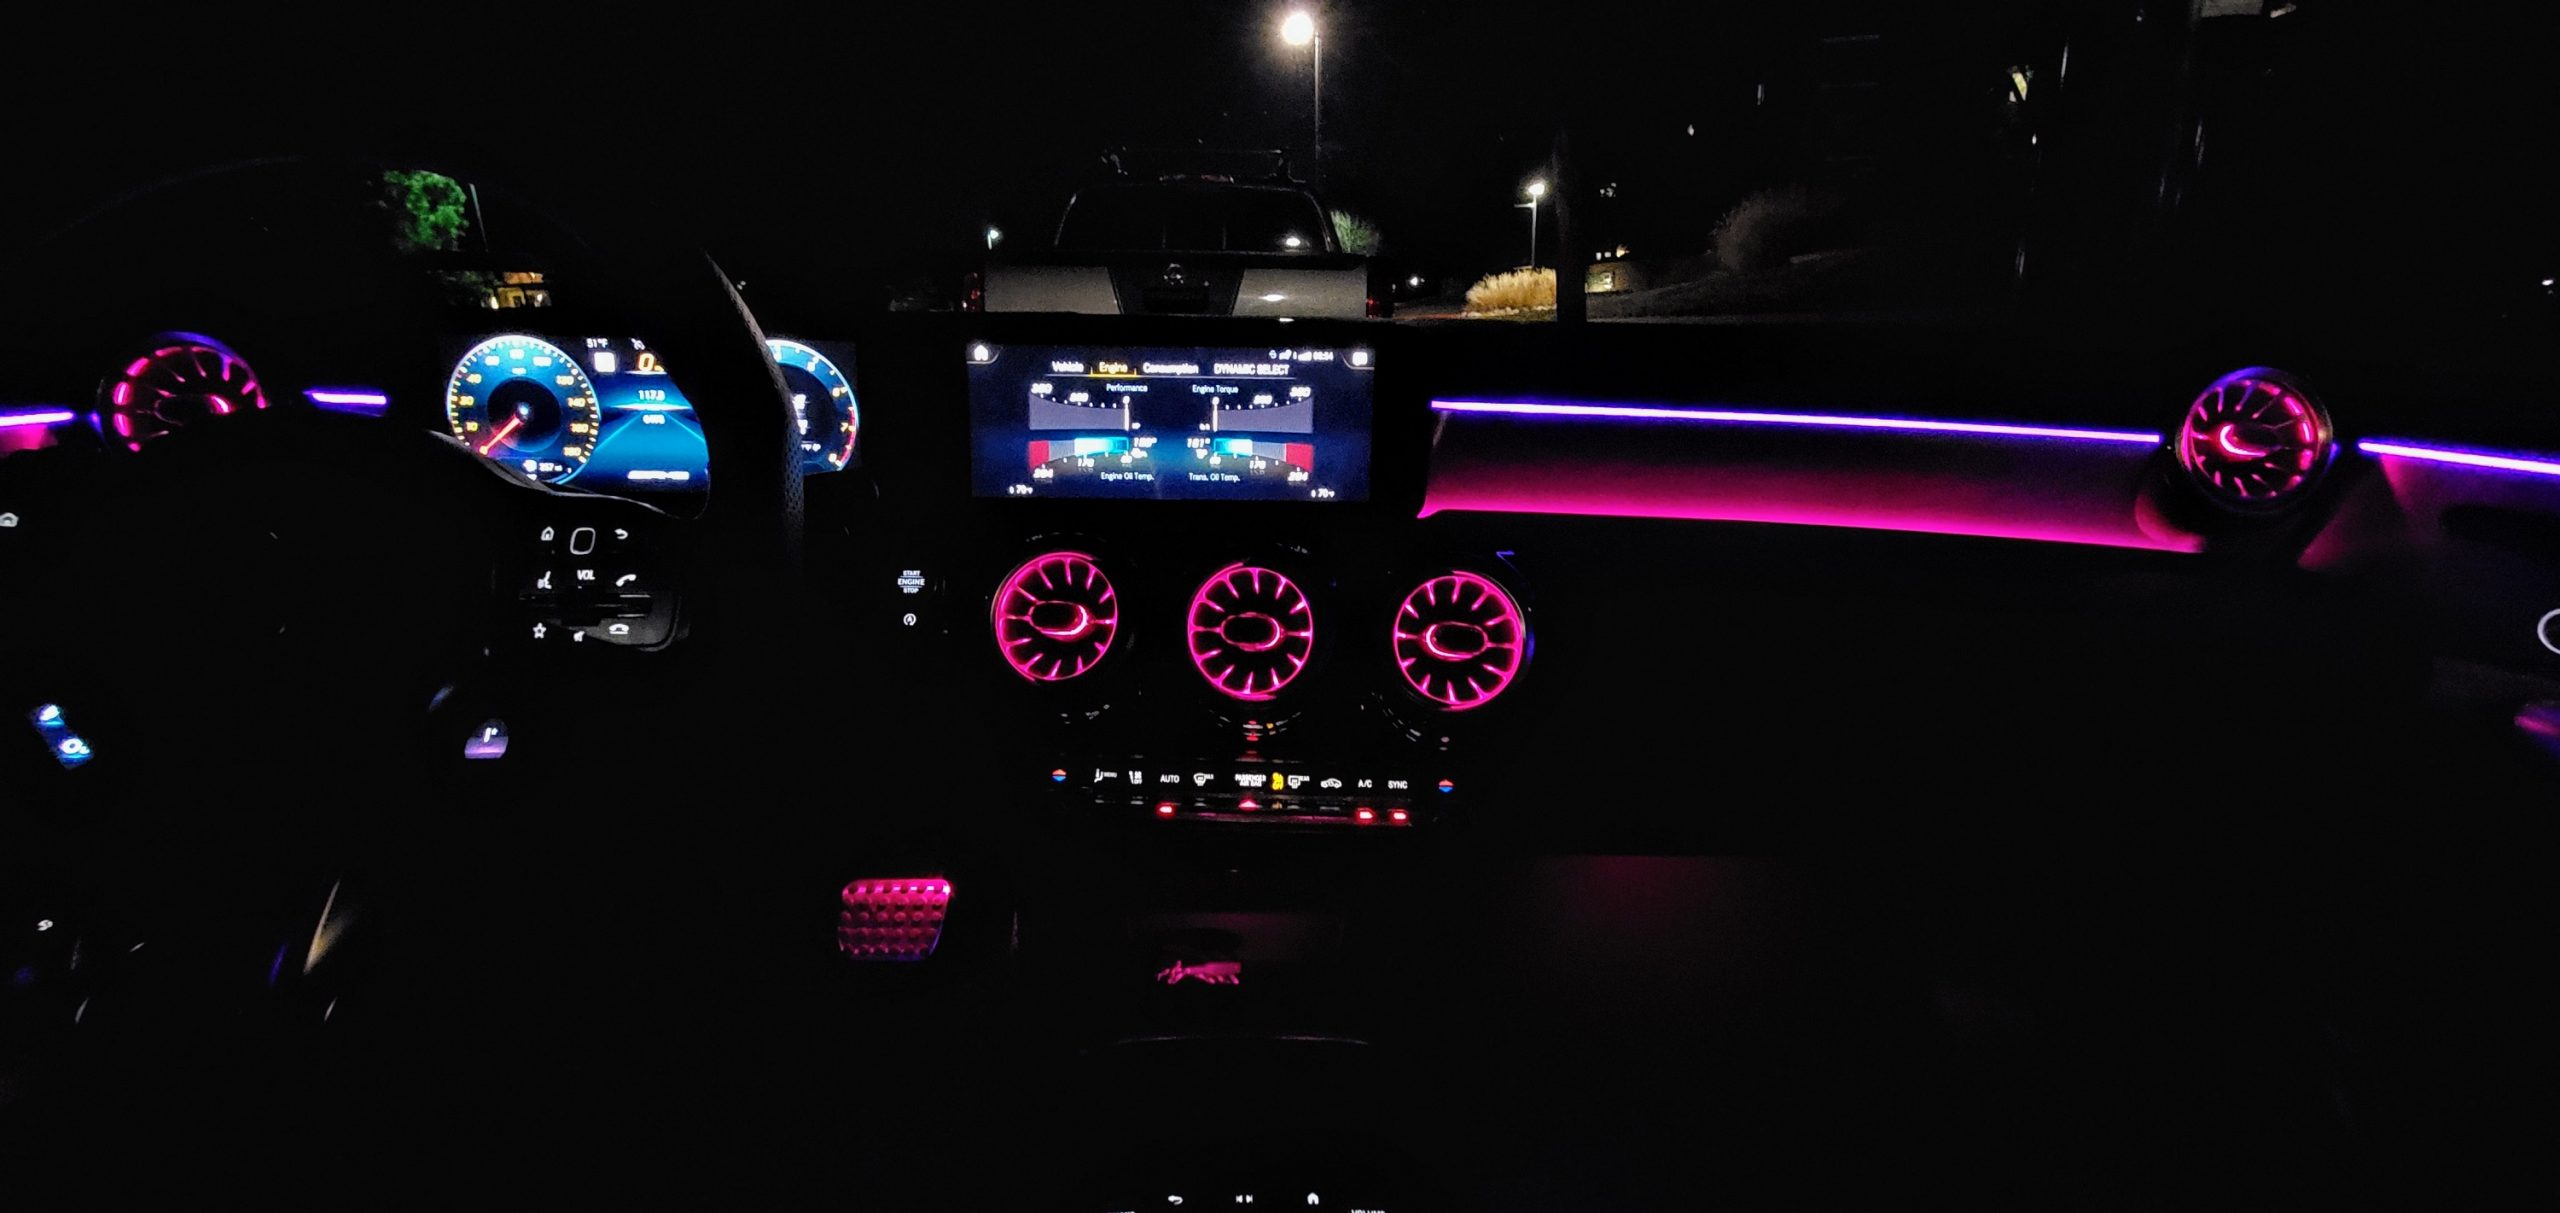 The interior of the AMG A35 illuminated by its ambient lighting at night